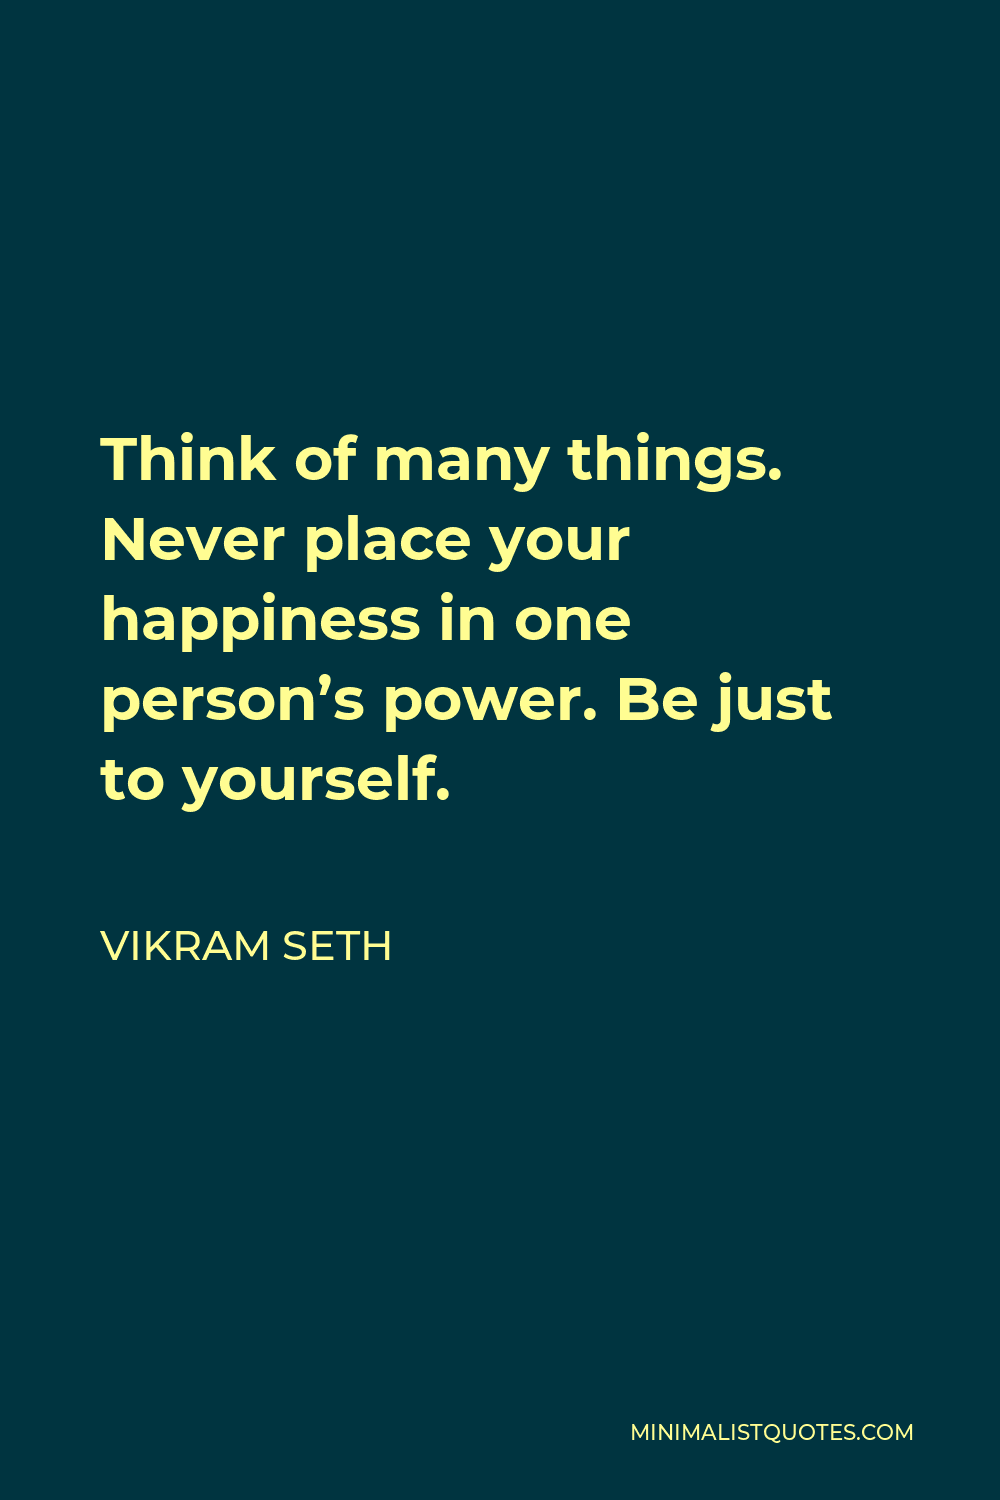 Vikram Seth Quote - Think of many things. Never place your happiness in one person’s power. Be just to yourself.